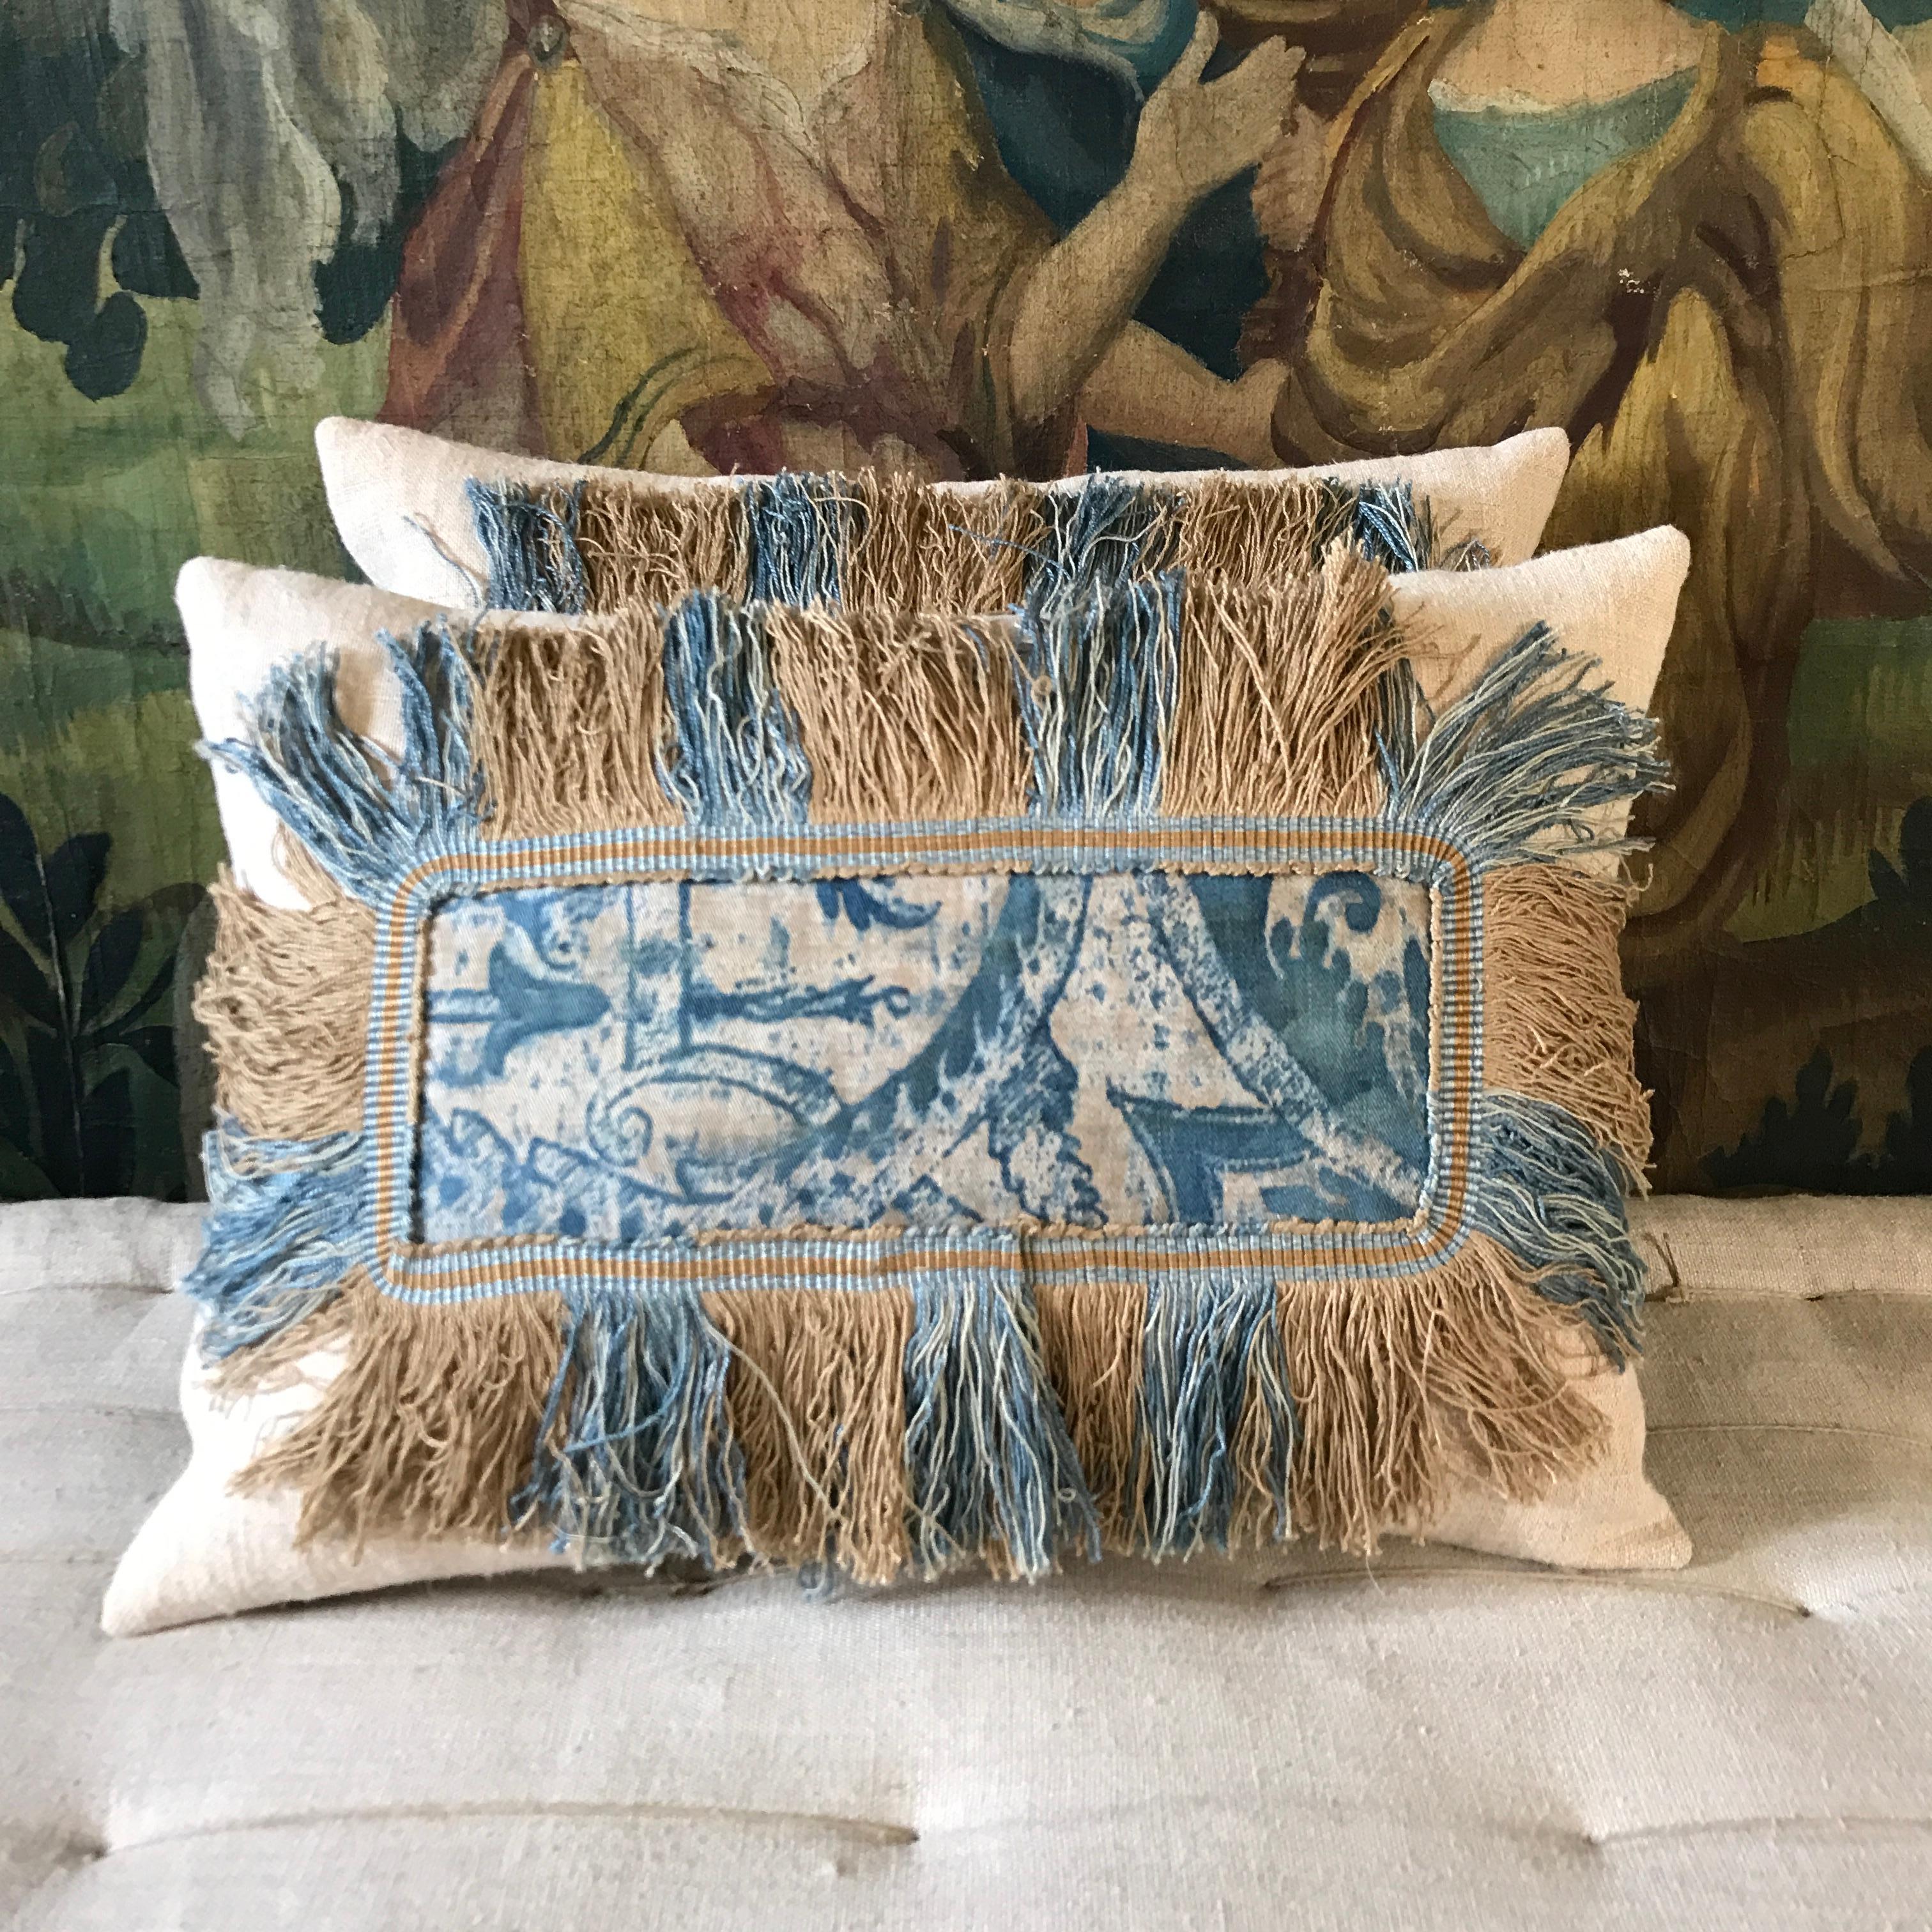 A pair of small cushions made from two fragments of a rare early Fortuny panel circa 1910-20 in a beautiful indigo blue placed on antique linen then trimmed on all edges with a complimentary coloured deep Claremont fringe - with a plain linen to